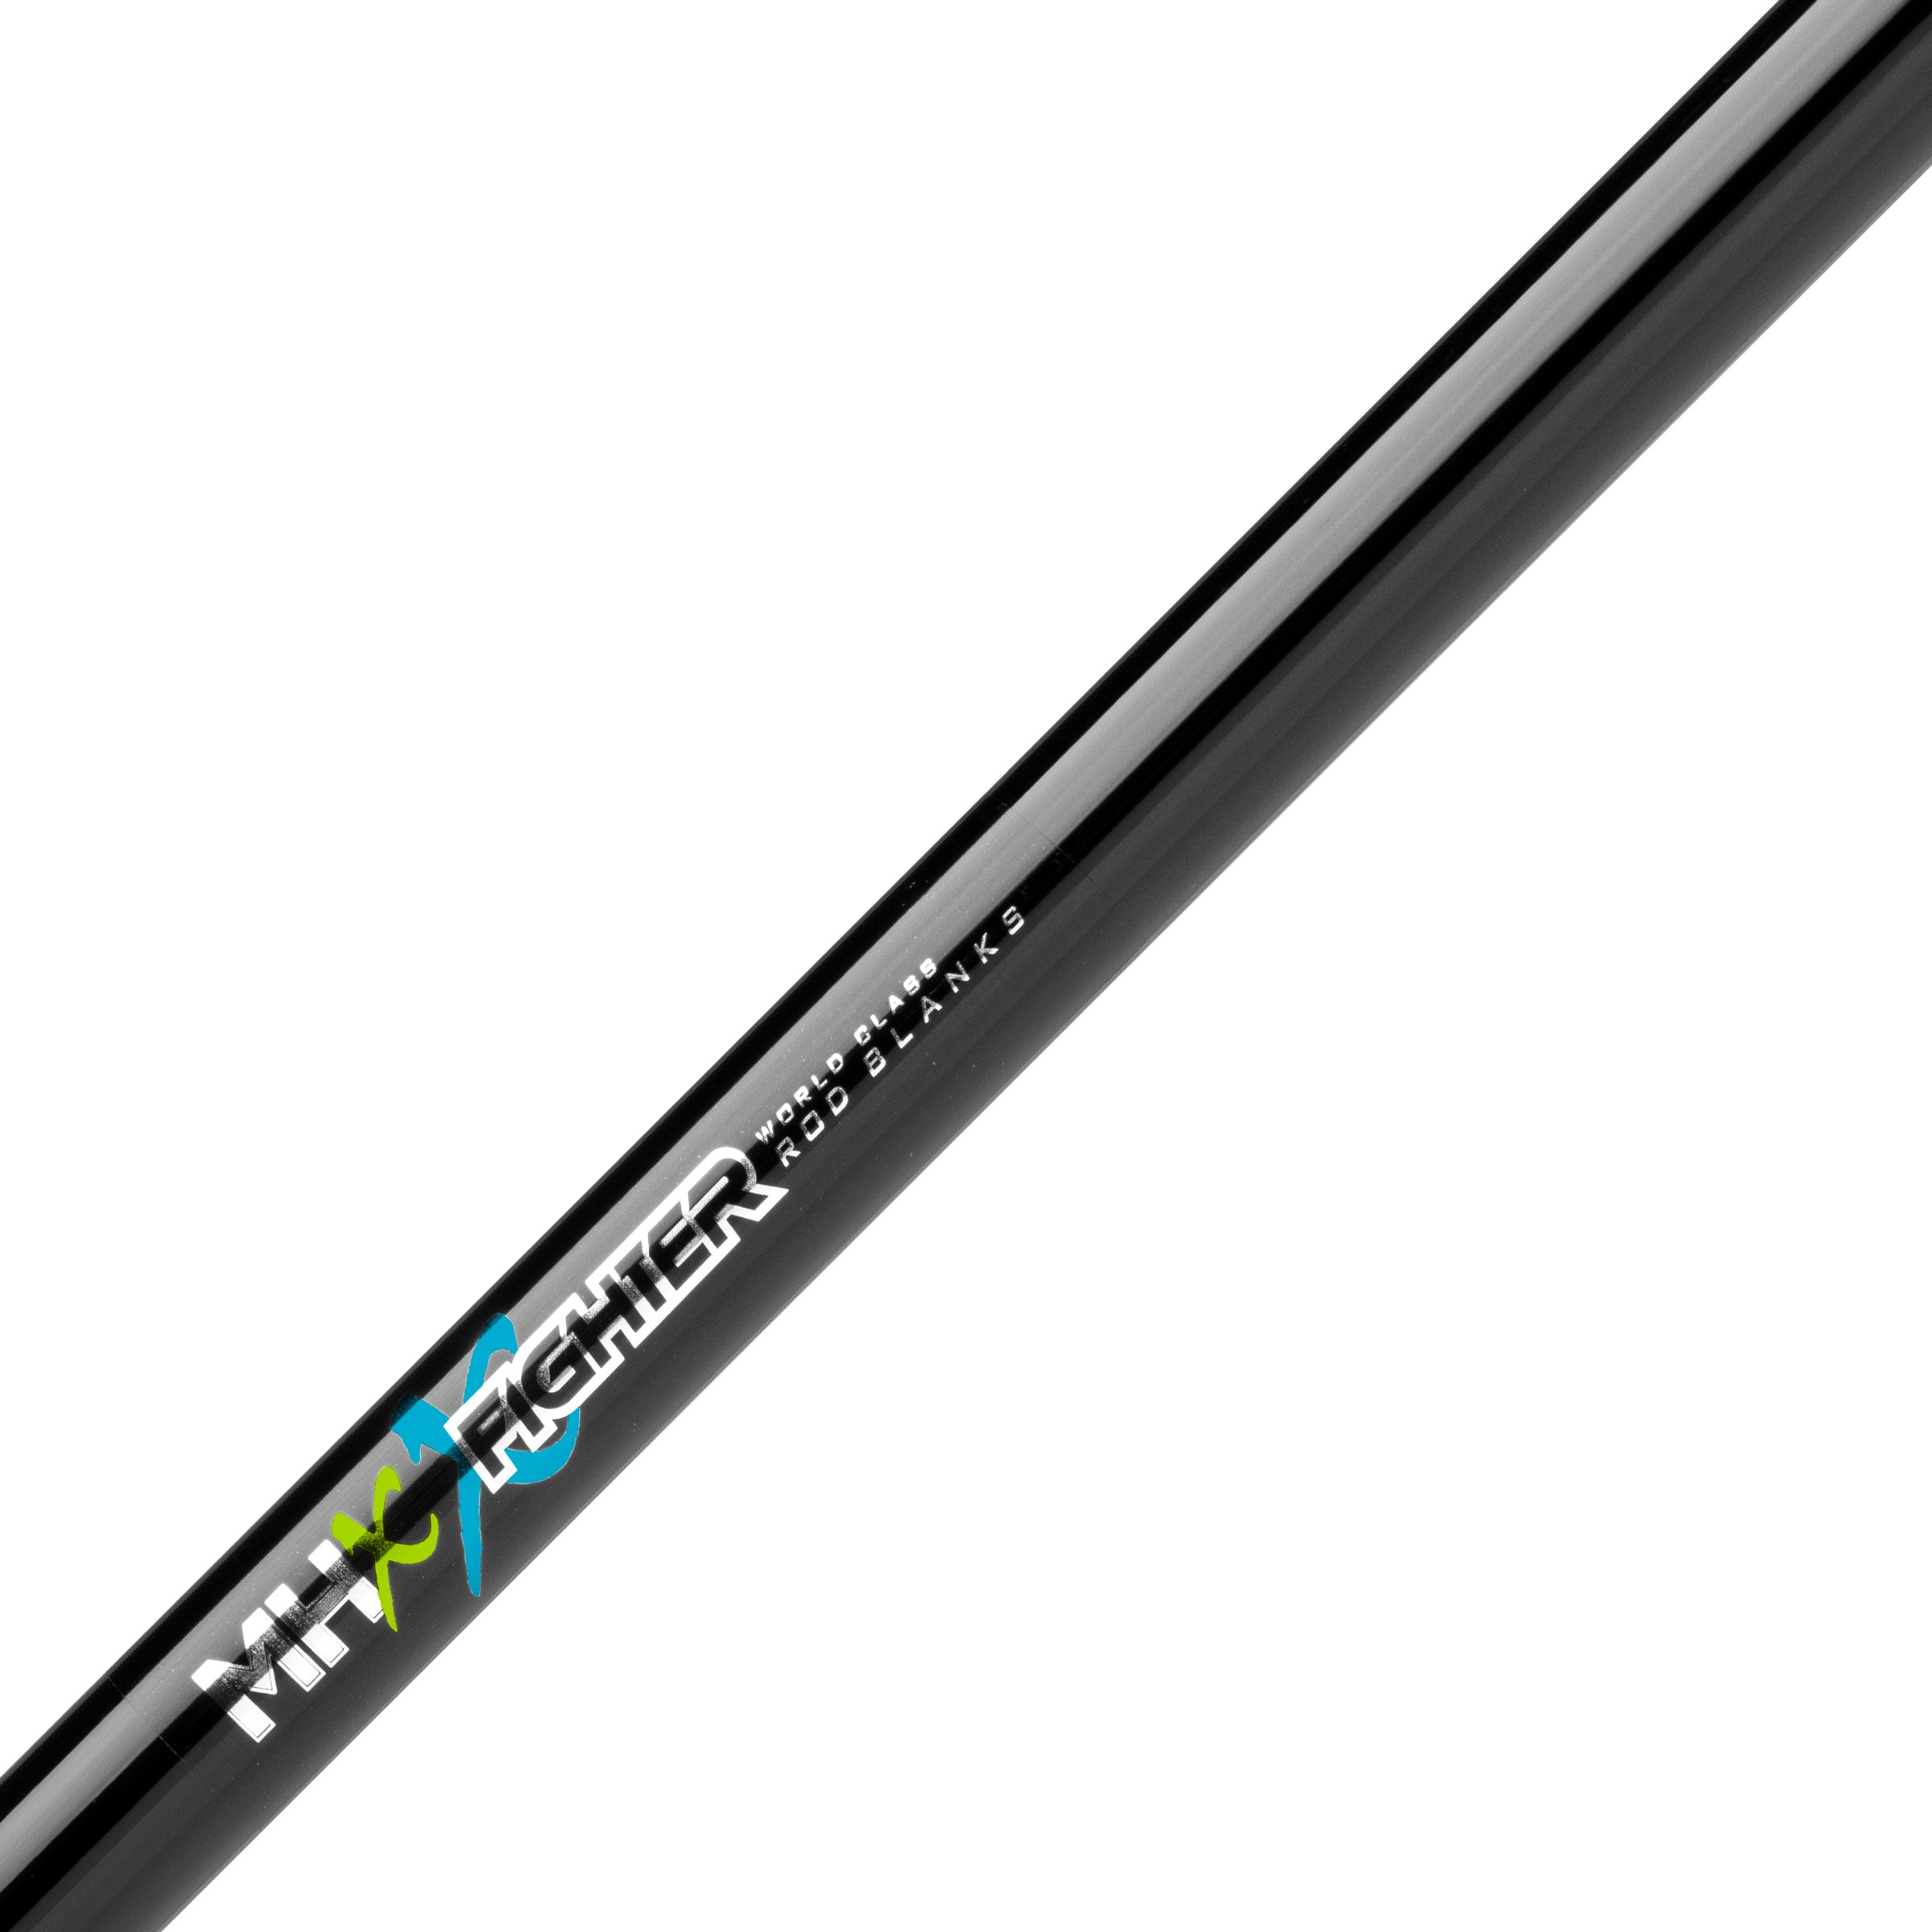 MHX 7'0" X-Heavy X-Fighter Offshore Graphite Composite Rod Blank XF700XH